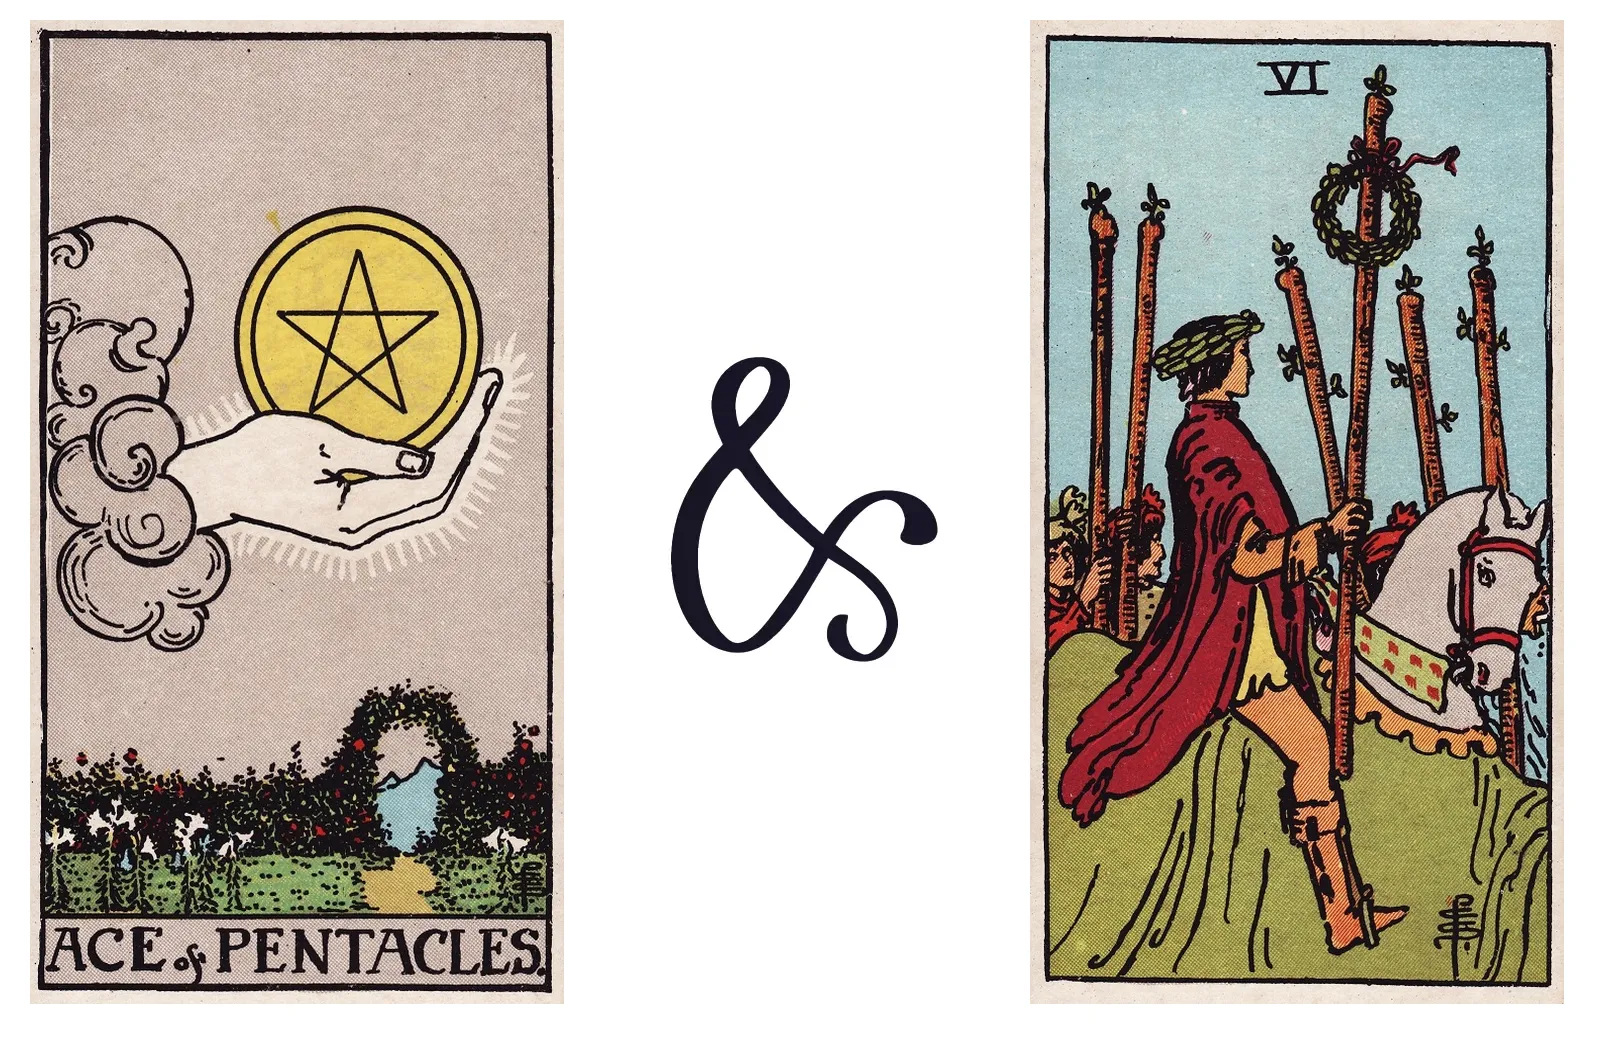 Ace of Pentacles and Six of Wands